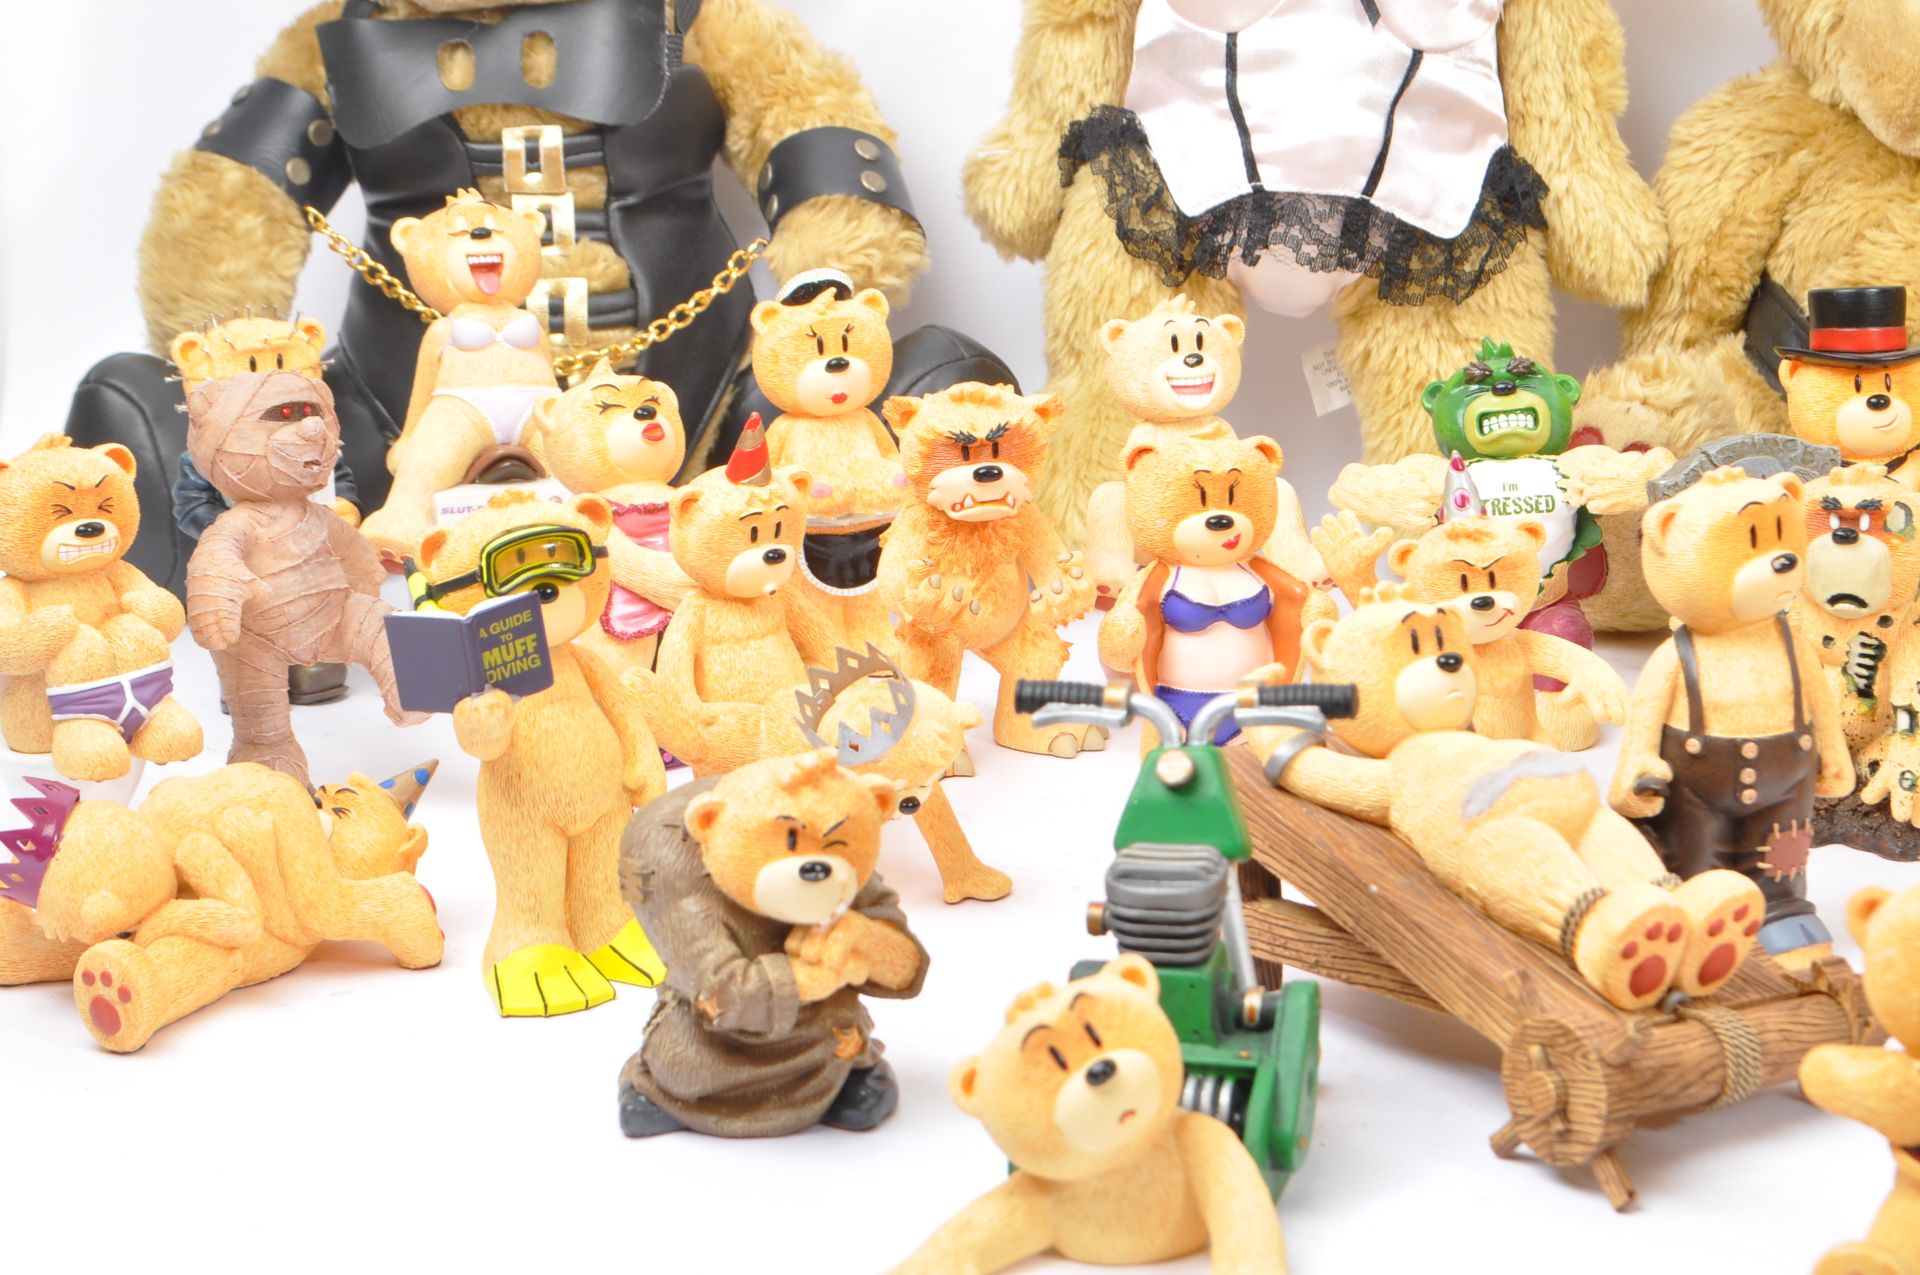 LARGE COLLECTION OF BAD TASTE BEARS FIGURINES - Image 2 of 12